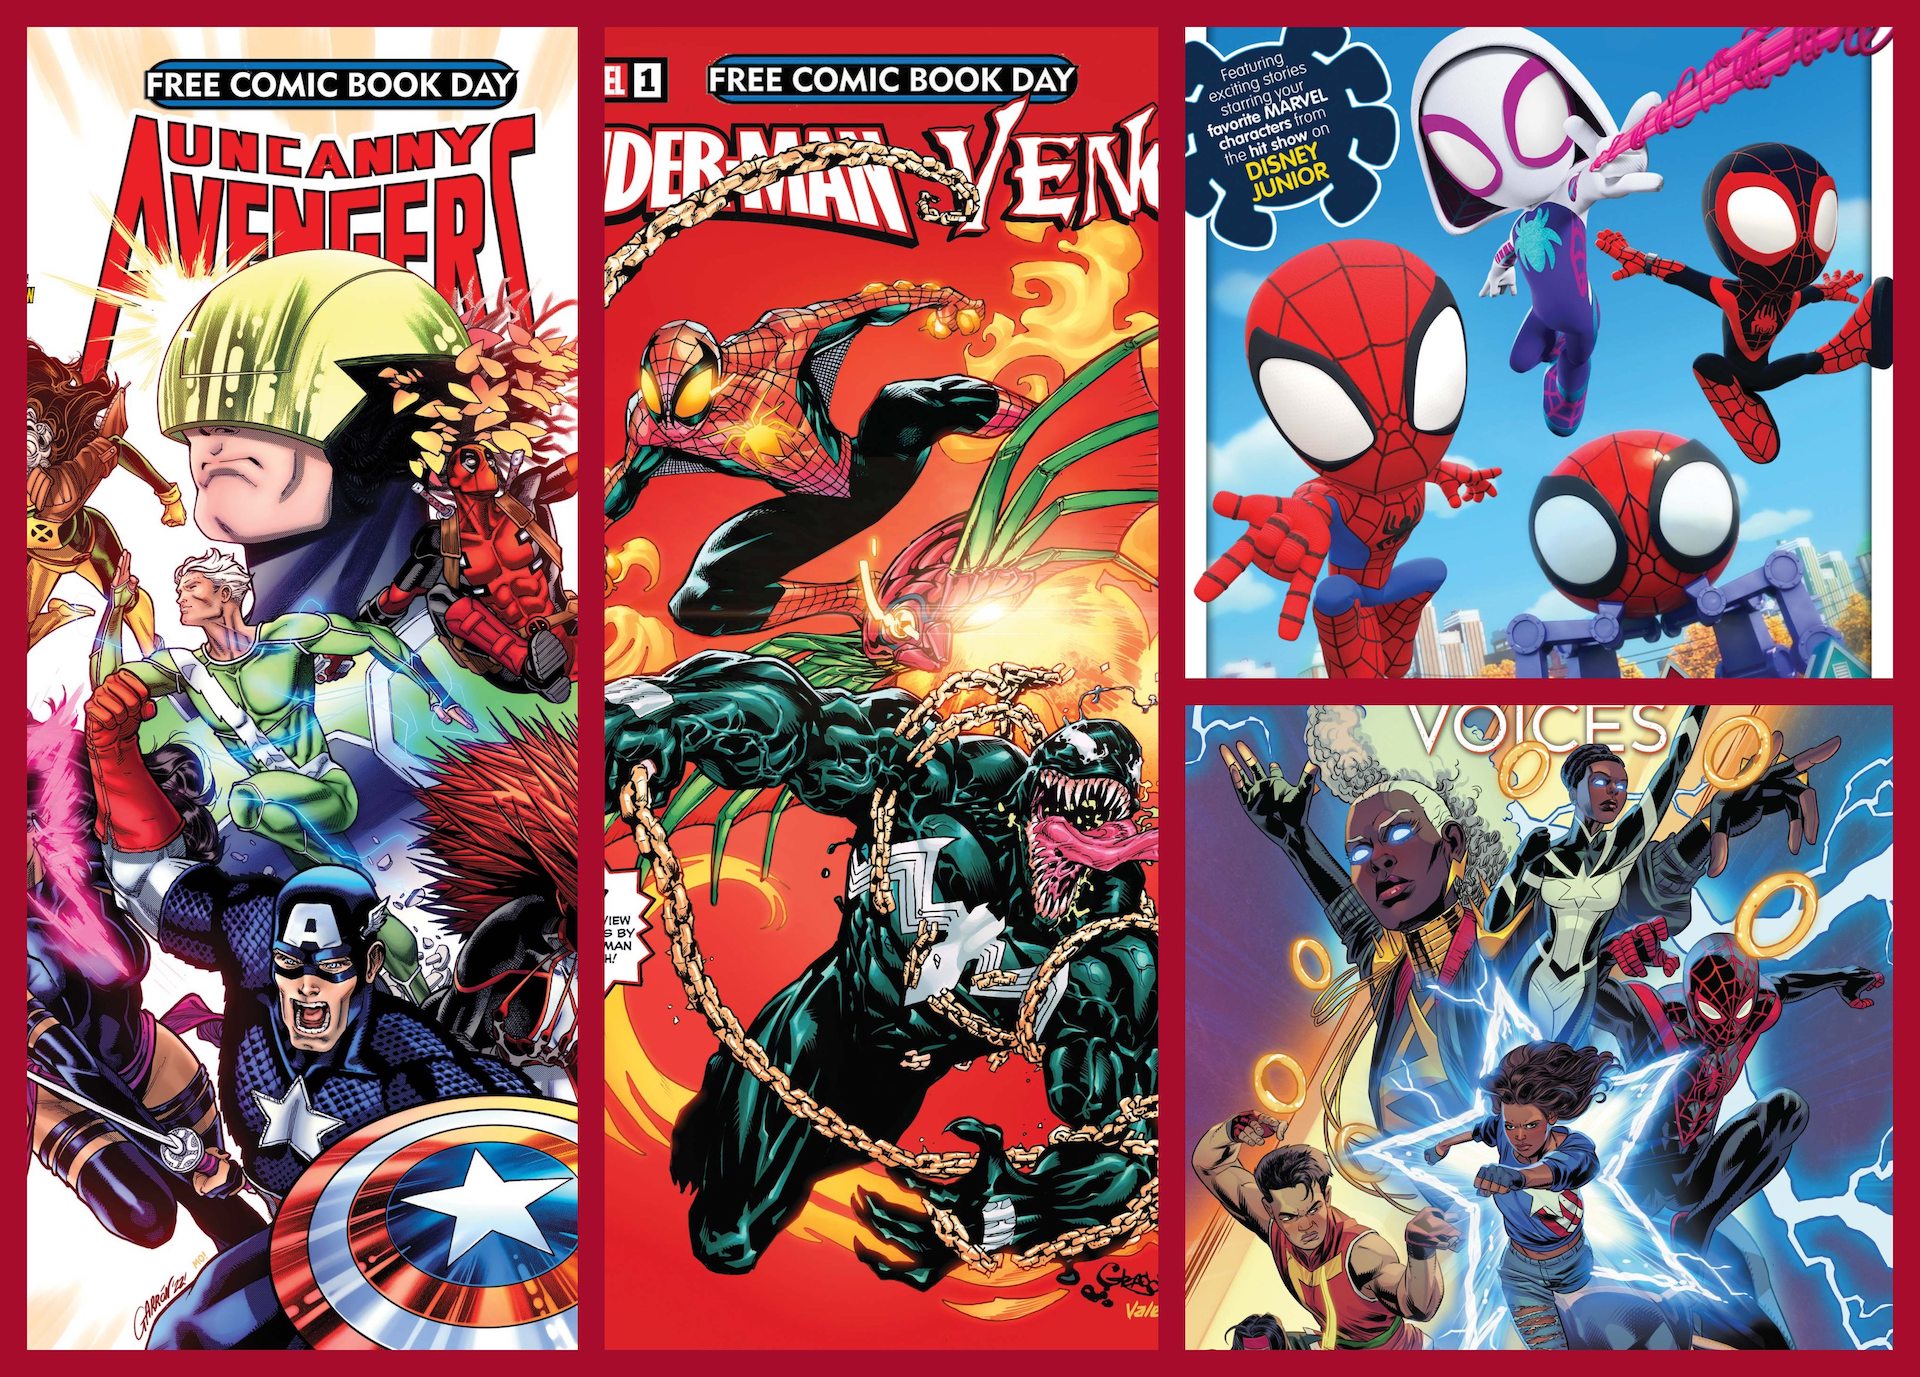 Marvel reveals new details on Free Comic Book Day 2023 offerings